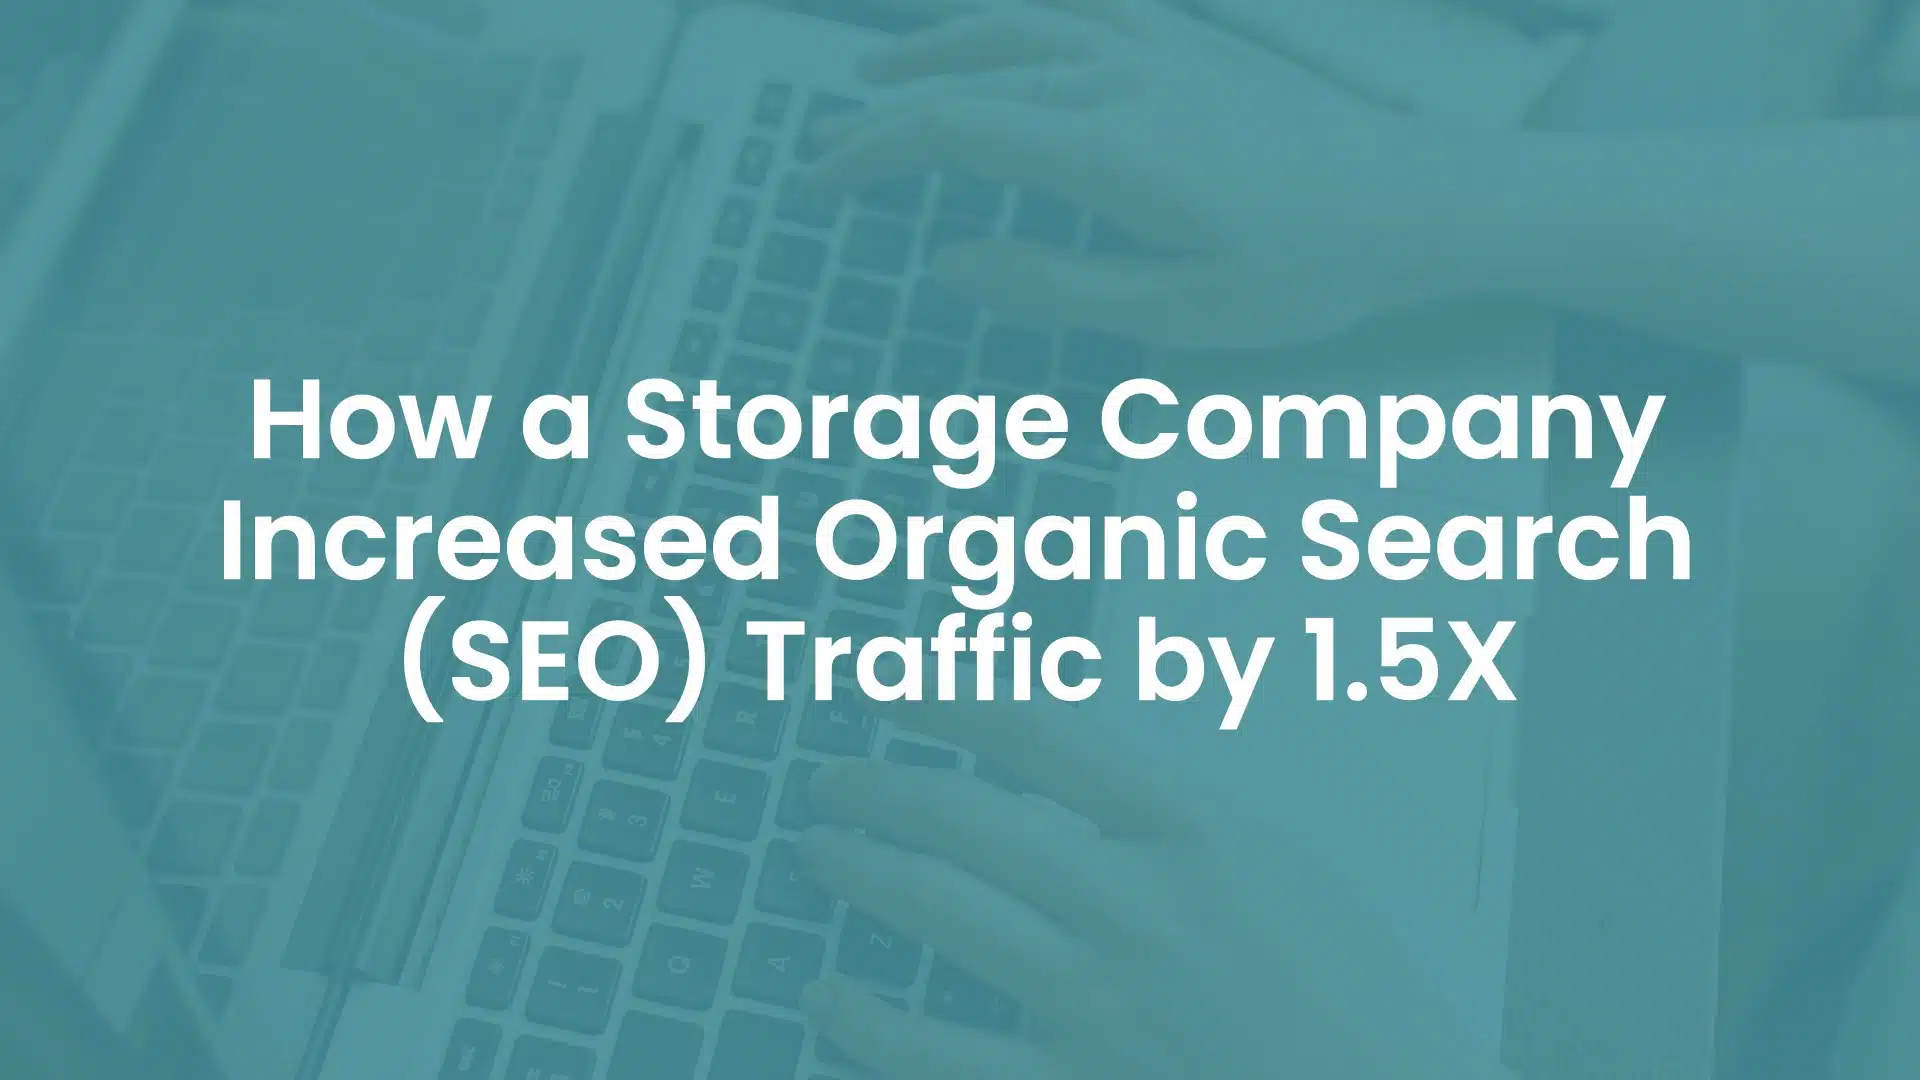 How A Storage Company Increased Organic Search (SEO) Traffic by 1.5X cover